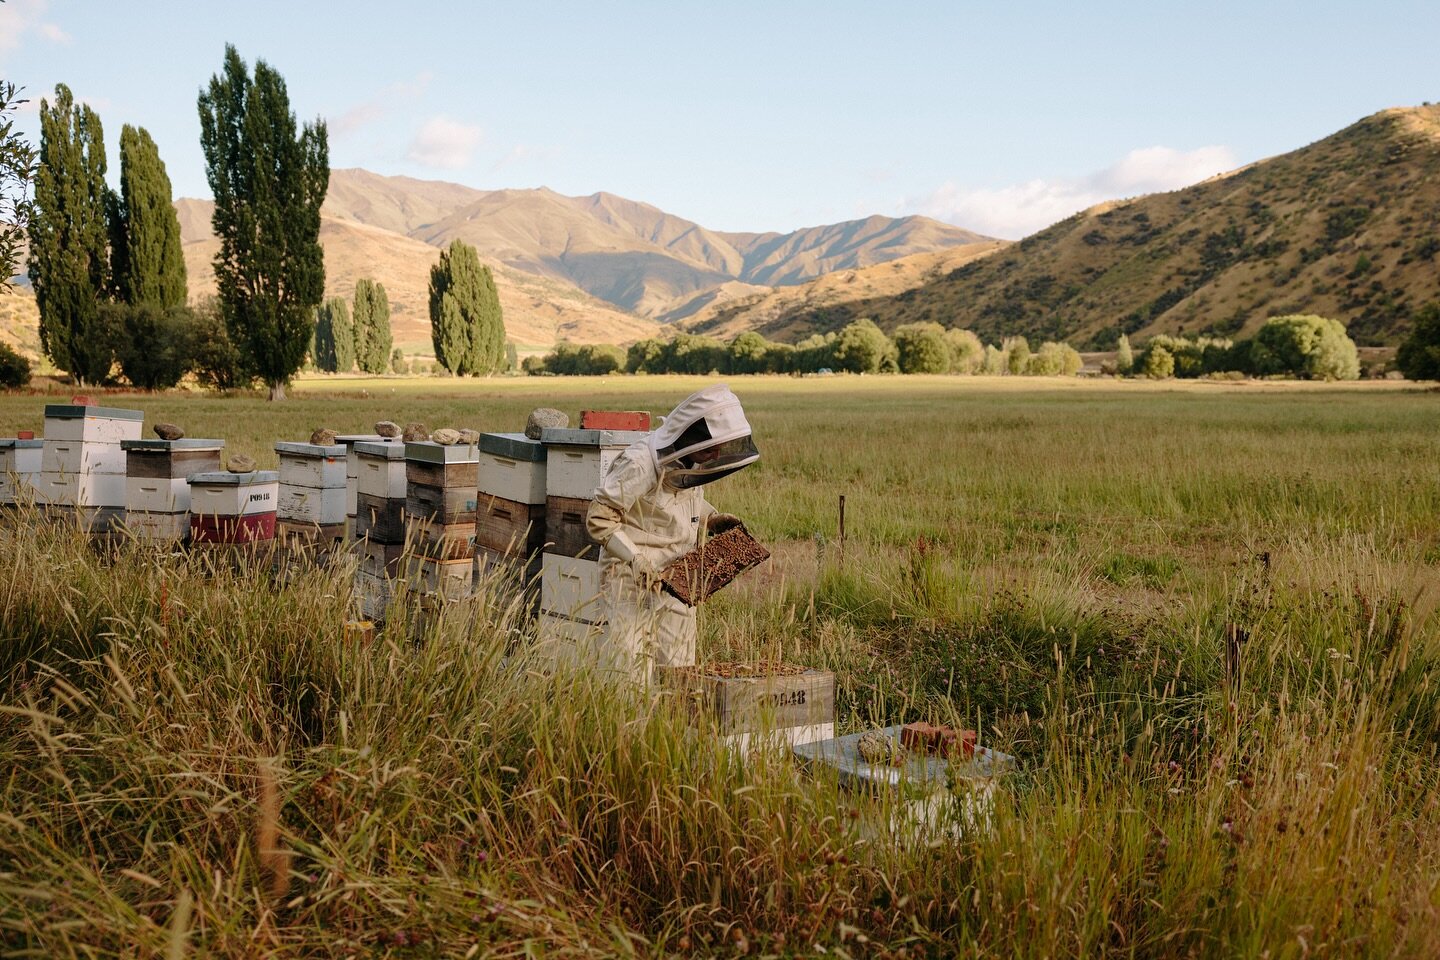 In the lead up to Christmas we&rsquo;ve got to check the progress of the hives and add more honey supers where needed. They&rsquo;re onto a honey flow now and super busy! 🐝🍯

We&rsquo;re hoping we get some rain to help the white clover produce abun